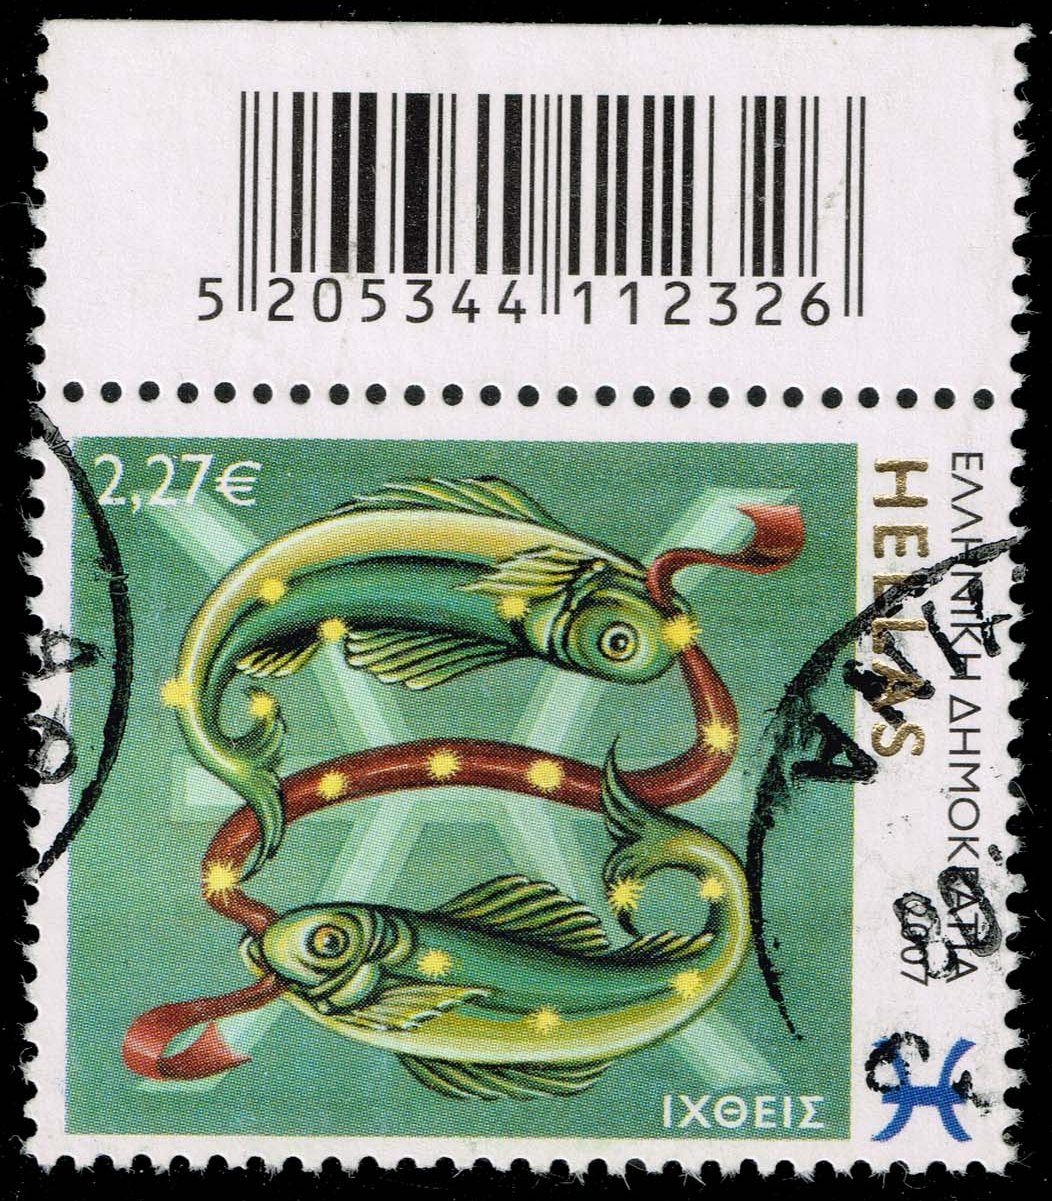 Greece #2317 Pisces; Used